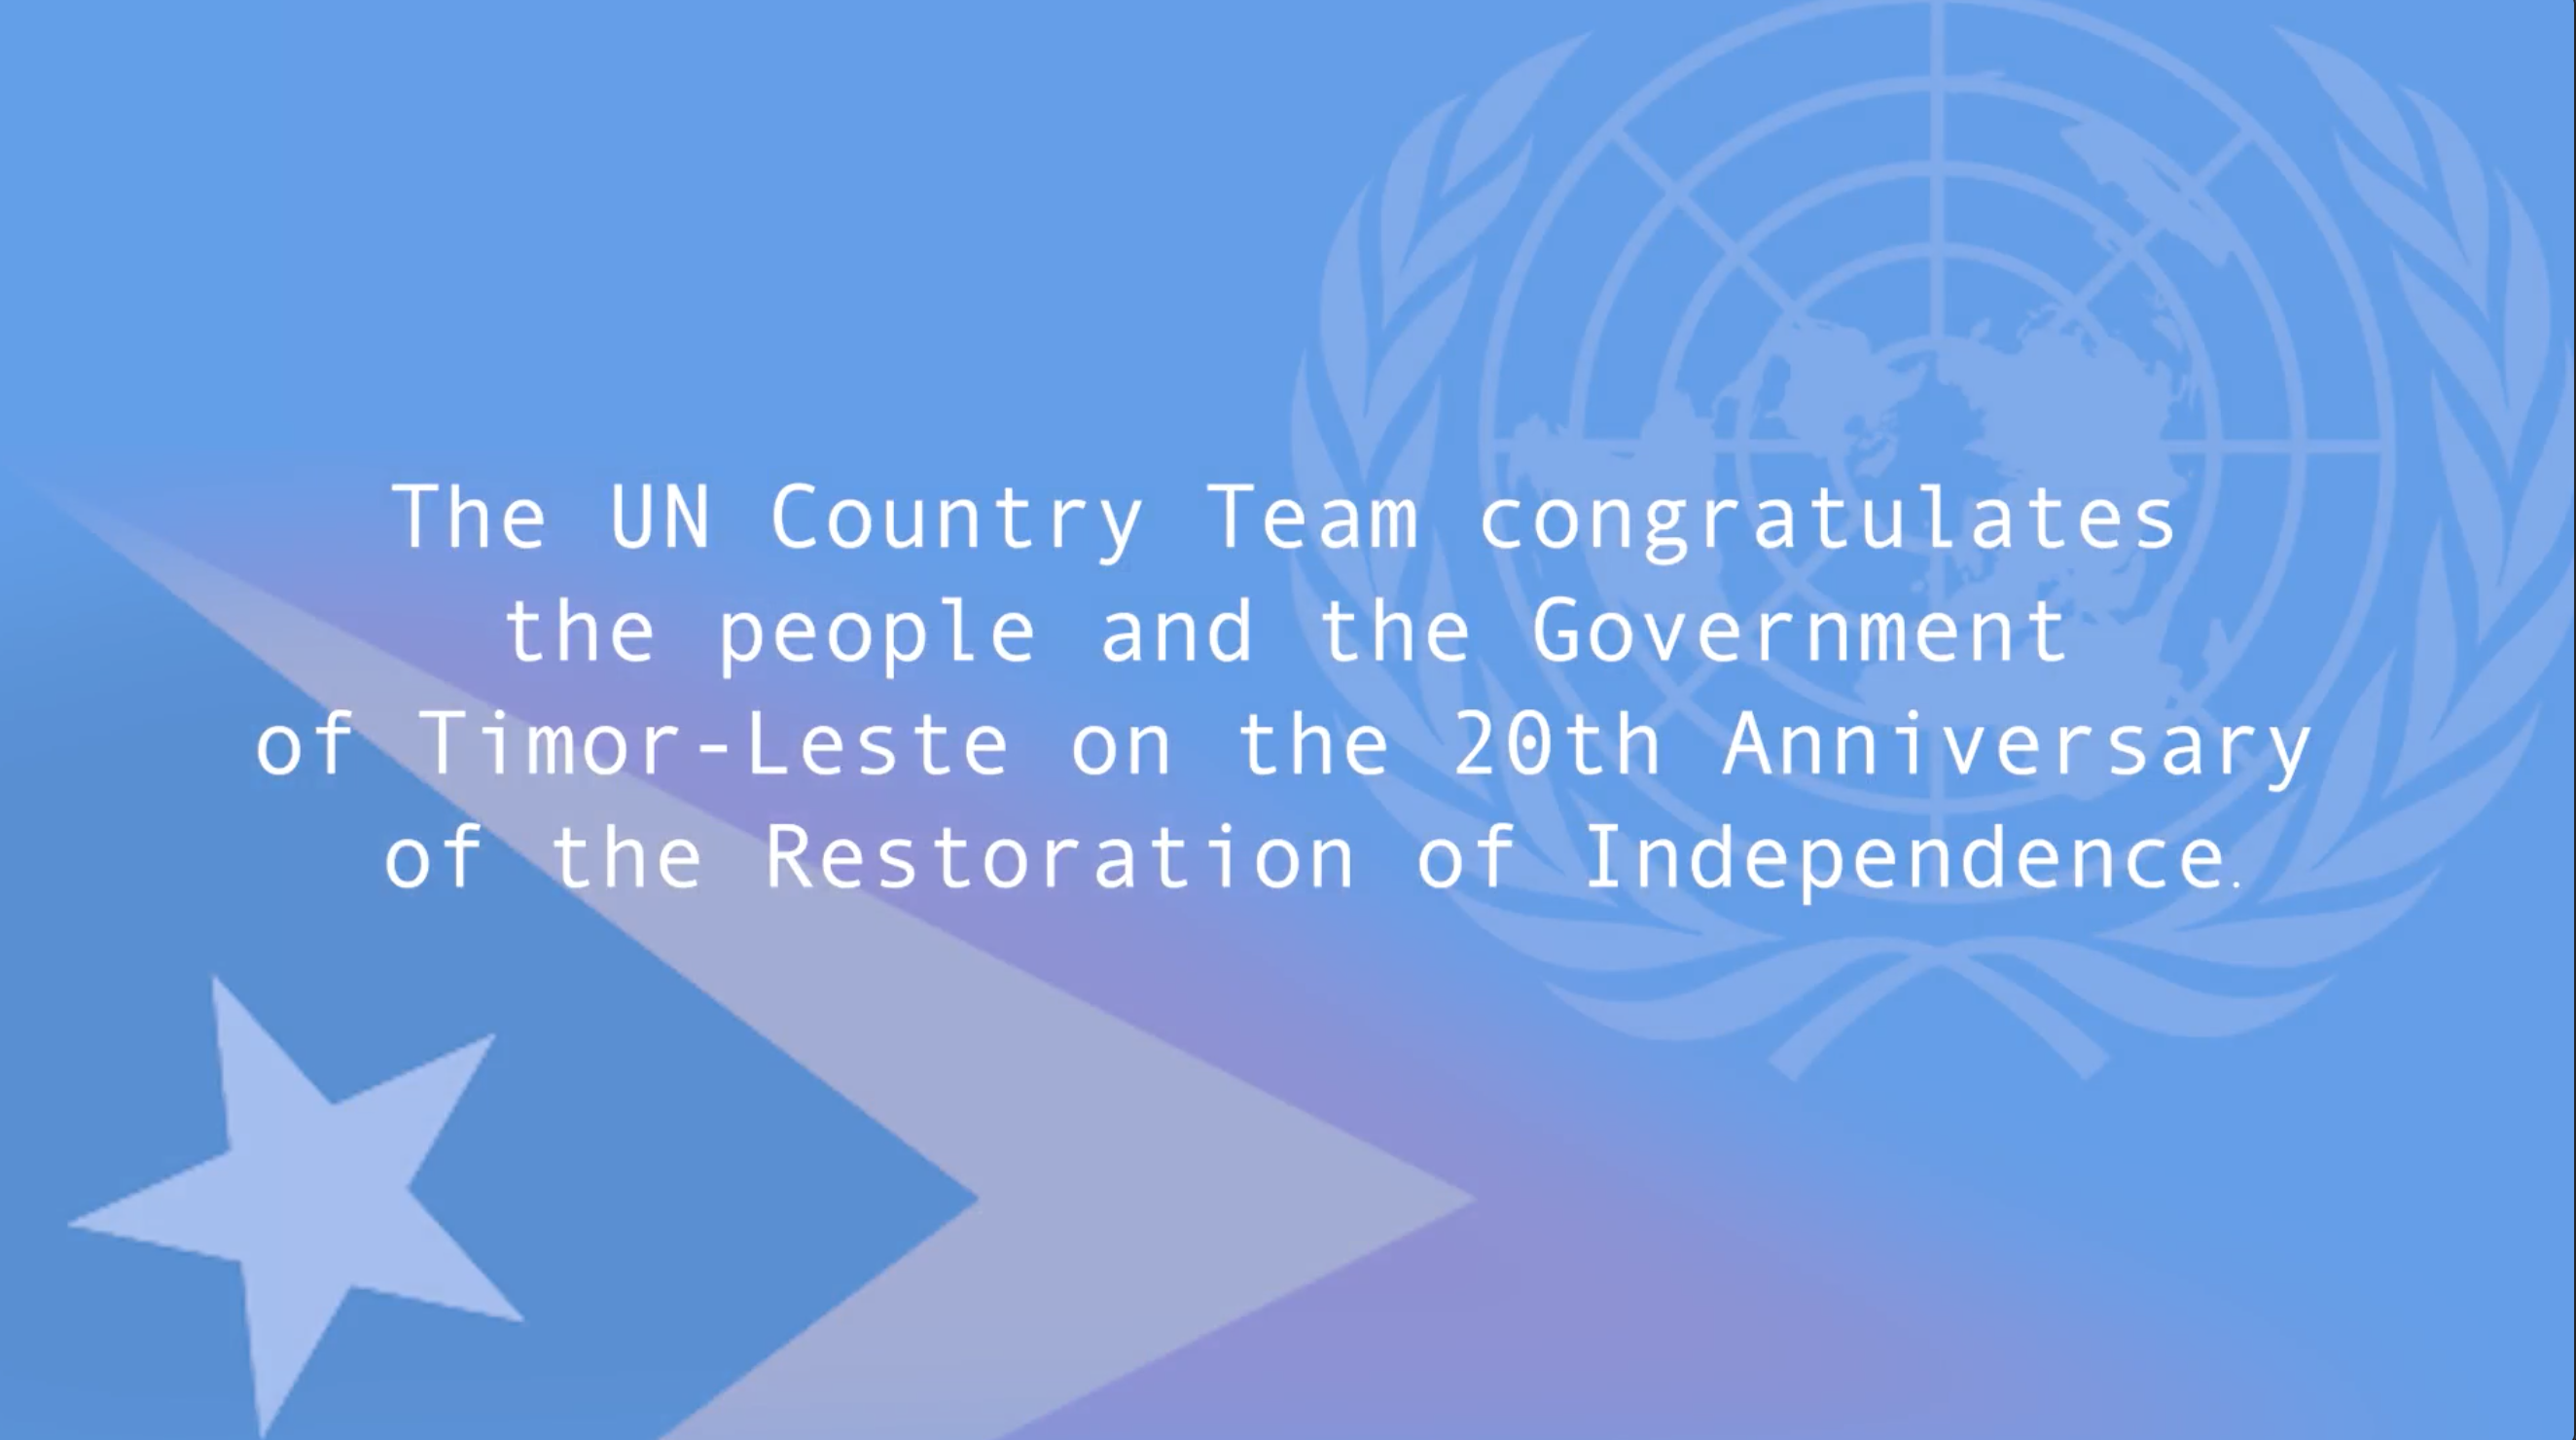 UN RESIDENT COORDINATOR AND COUNTRY TEAM WISH TIMOR-LESTE 20TH ANNIVERSARY OF RESTORATION OF INDEPENDENCE